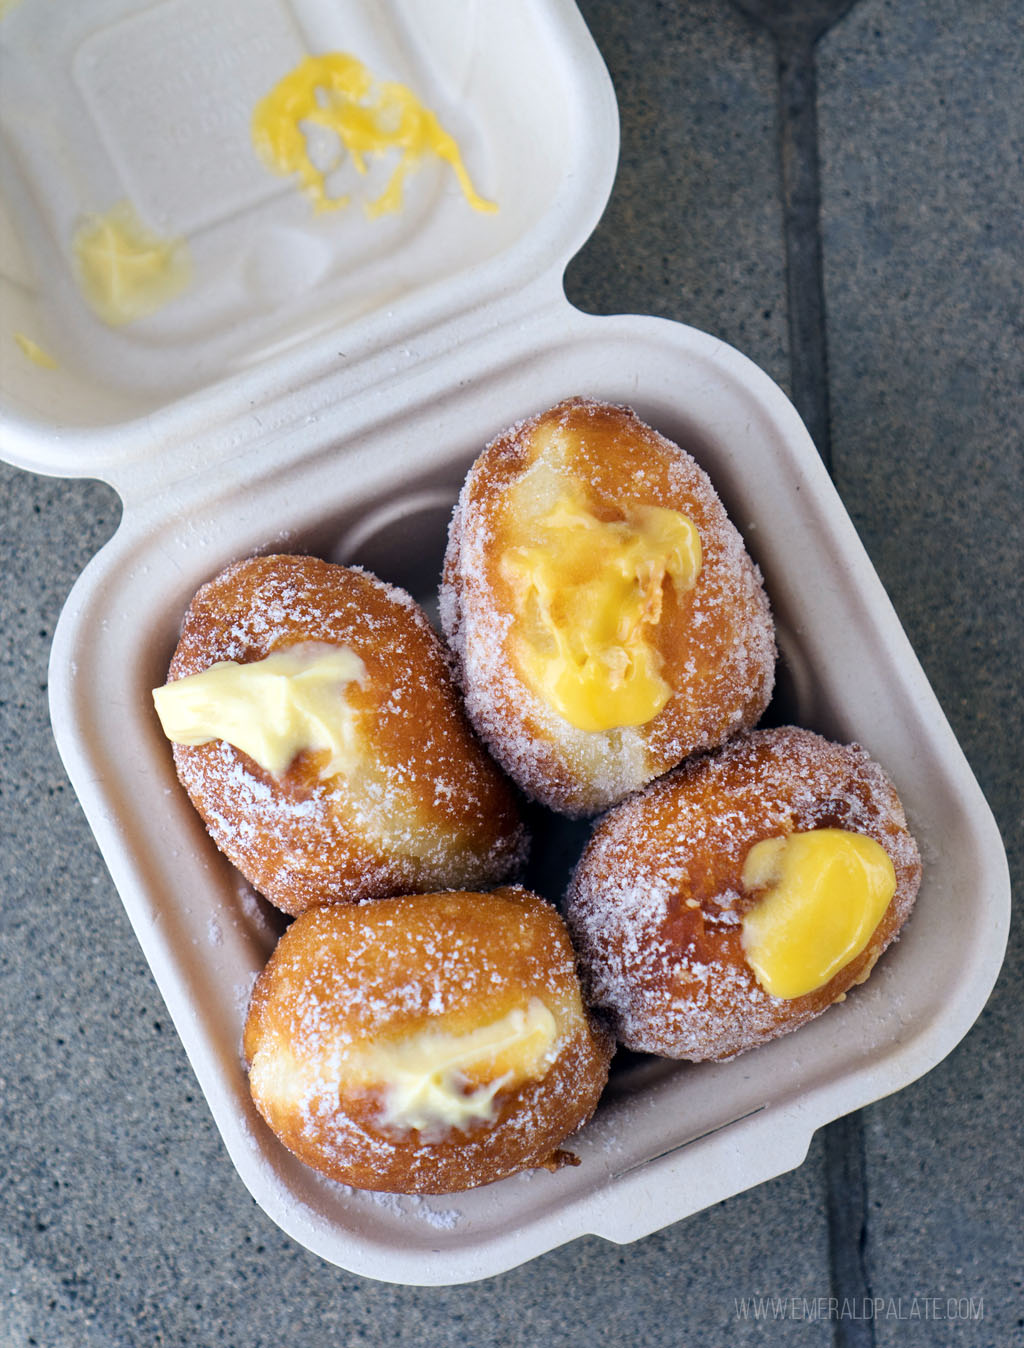 takeout container of cream filled malasadas